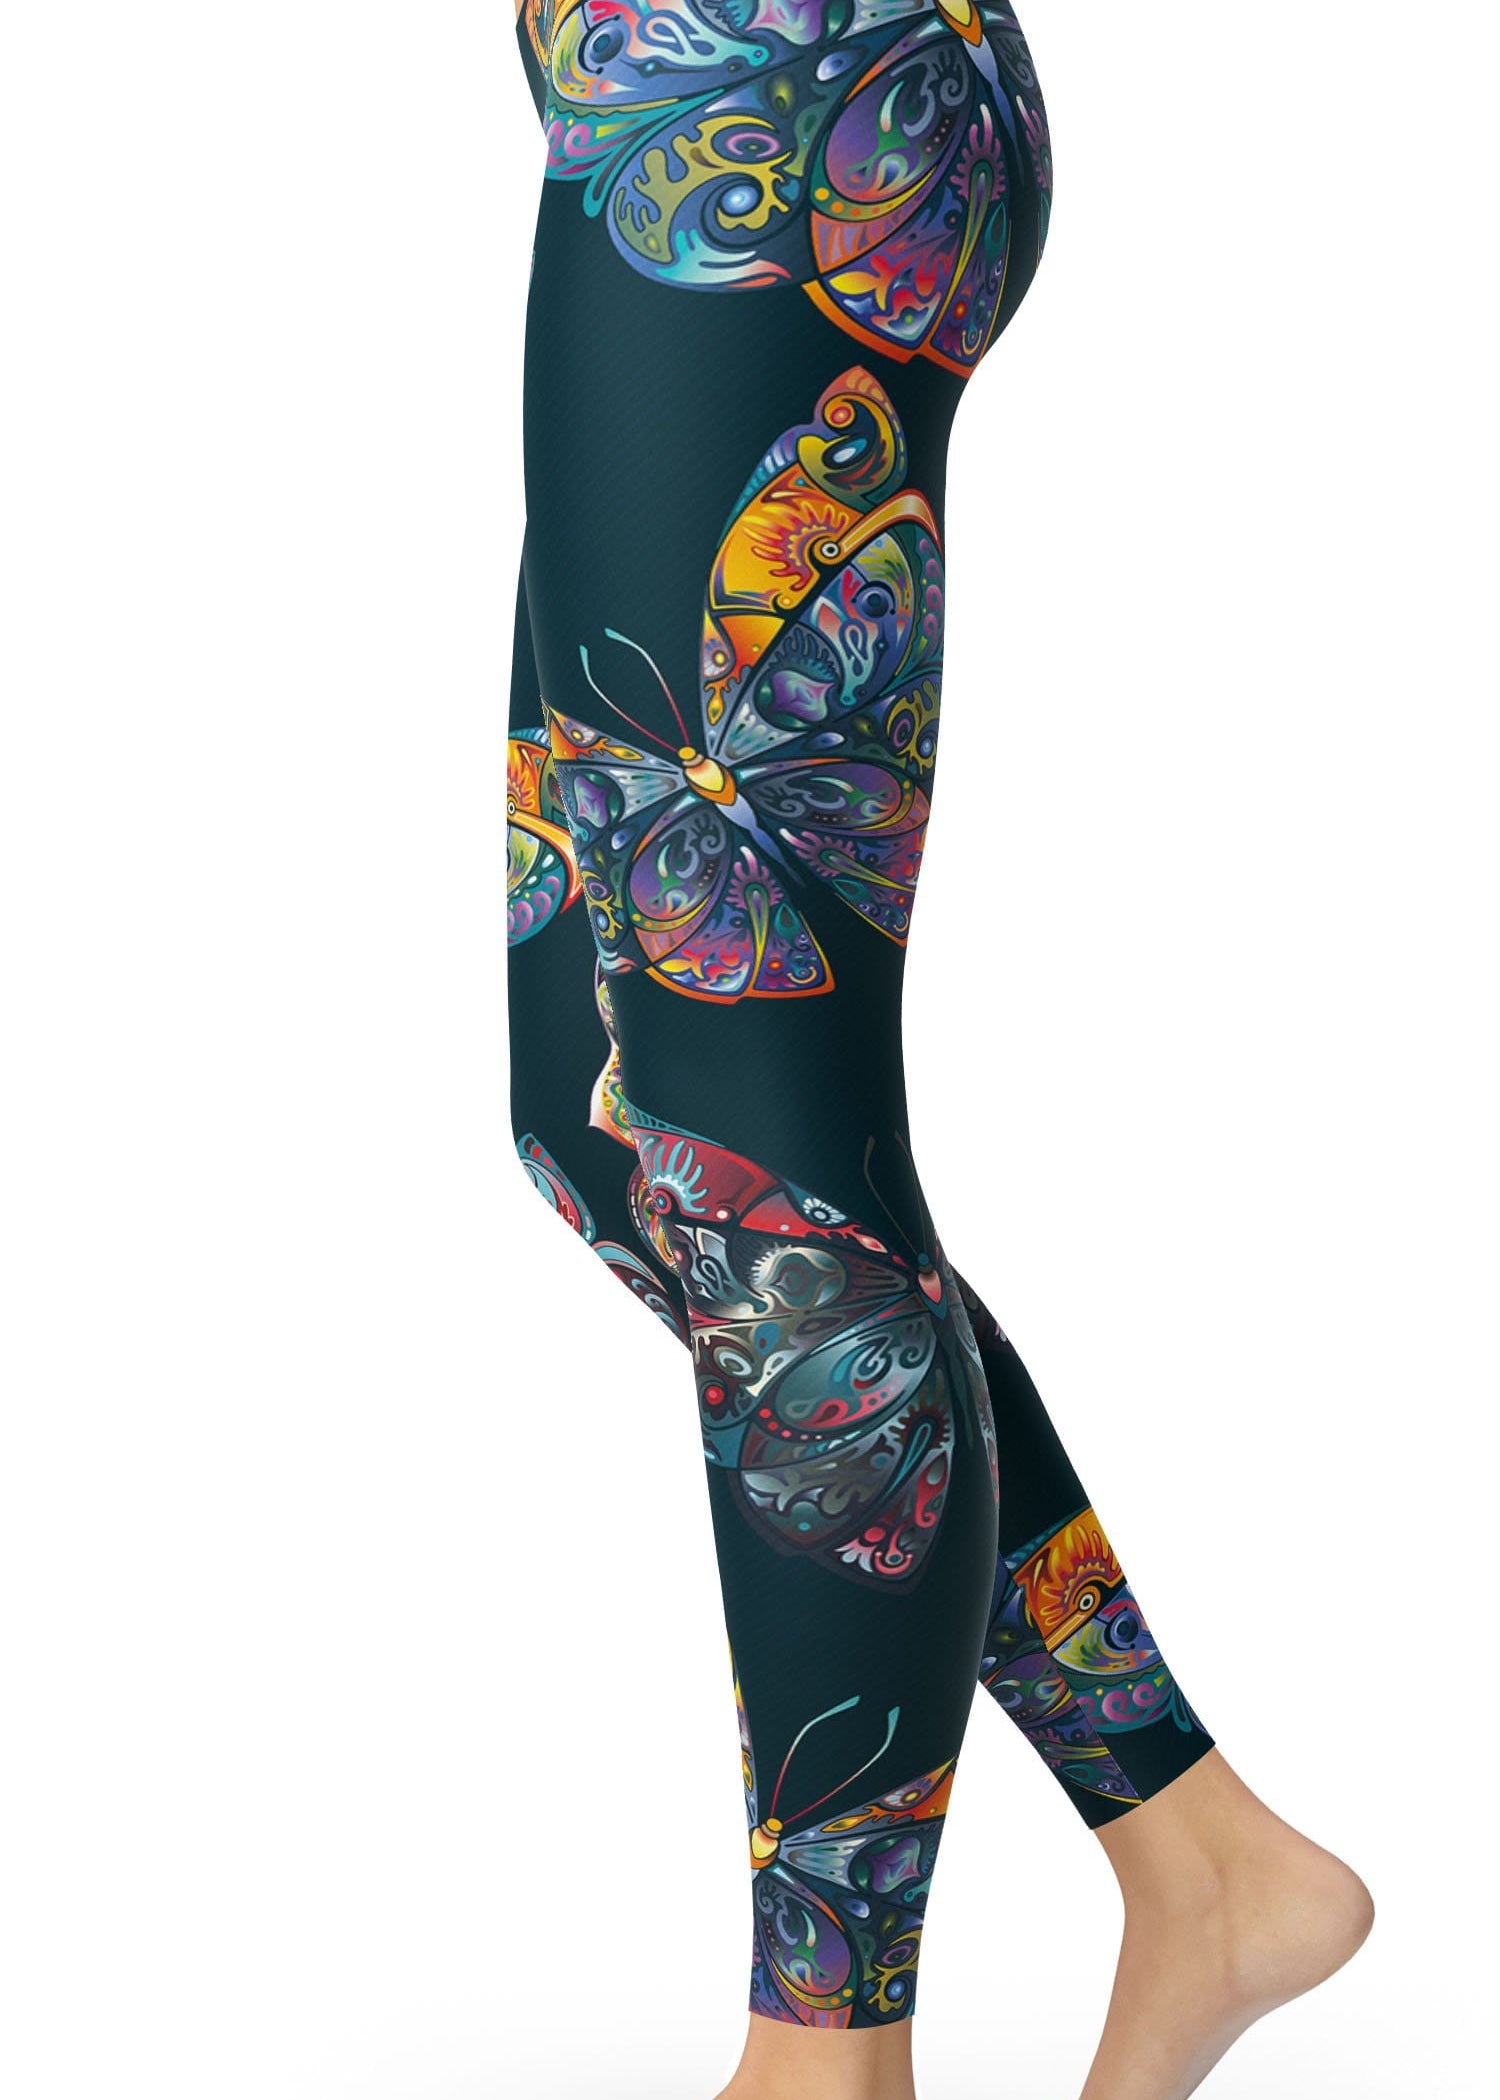 Colorfull Butterfly's Leggings - US FITGIRLS